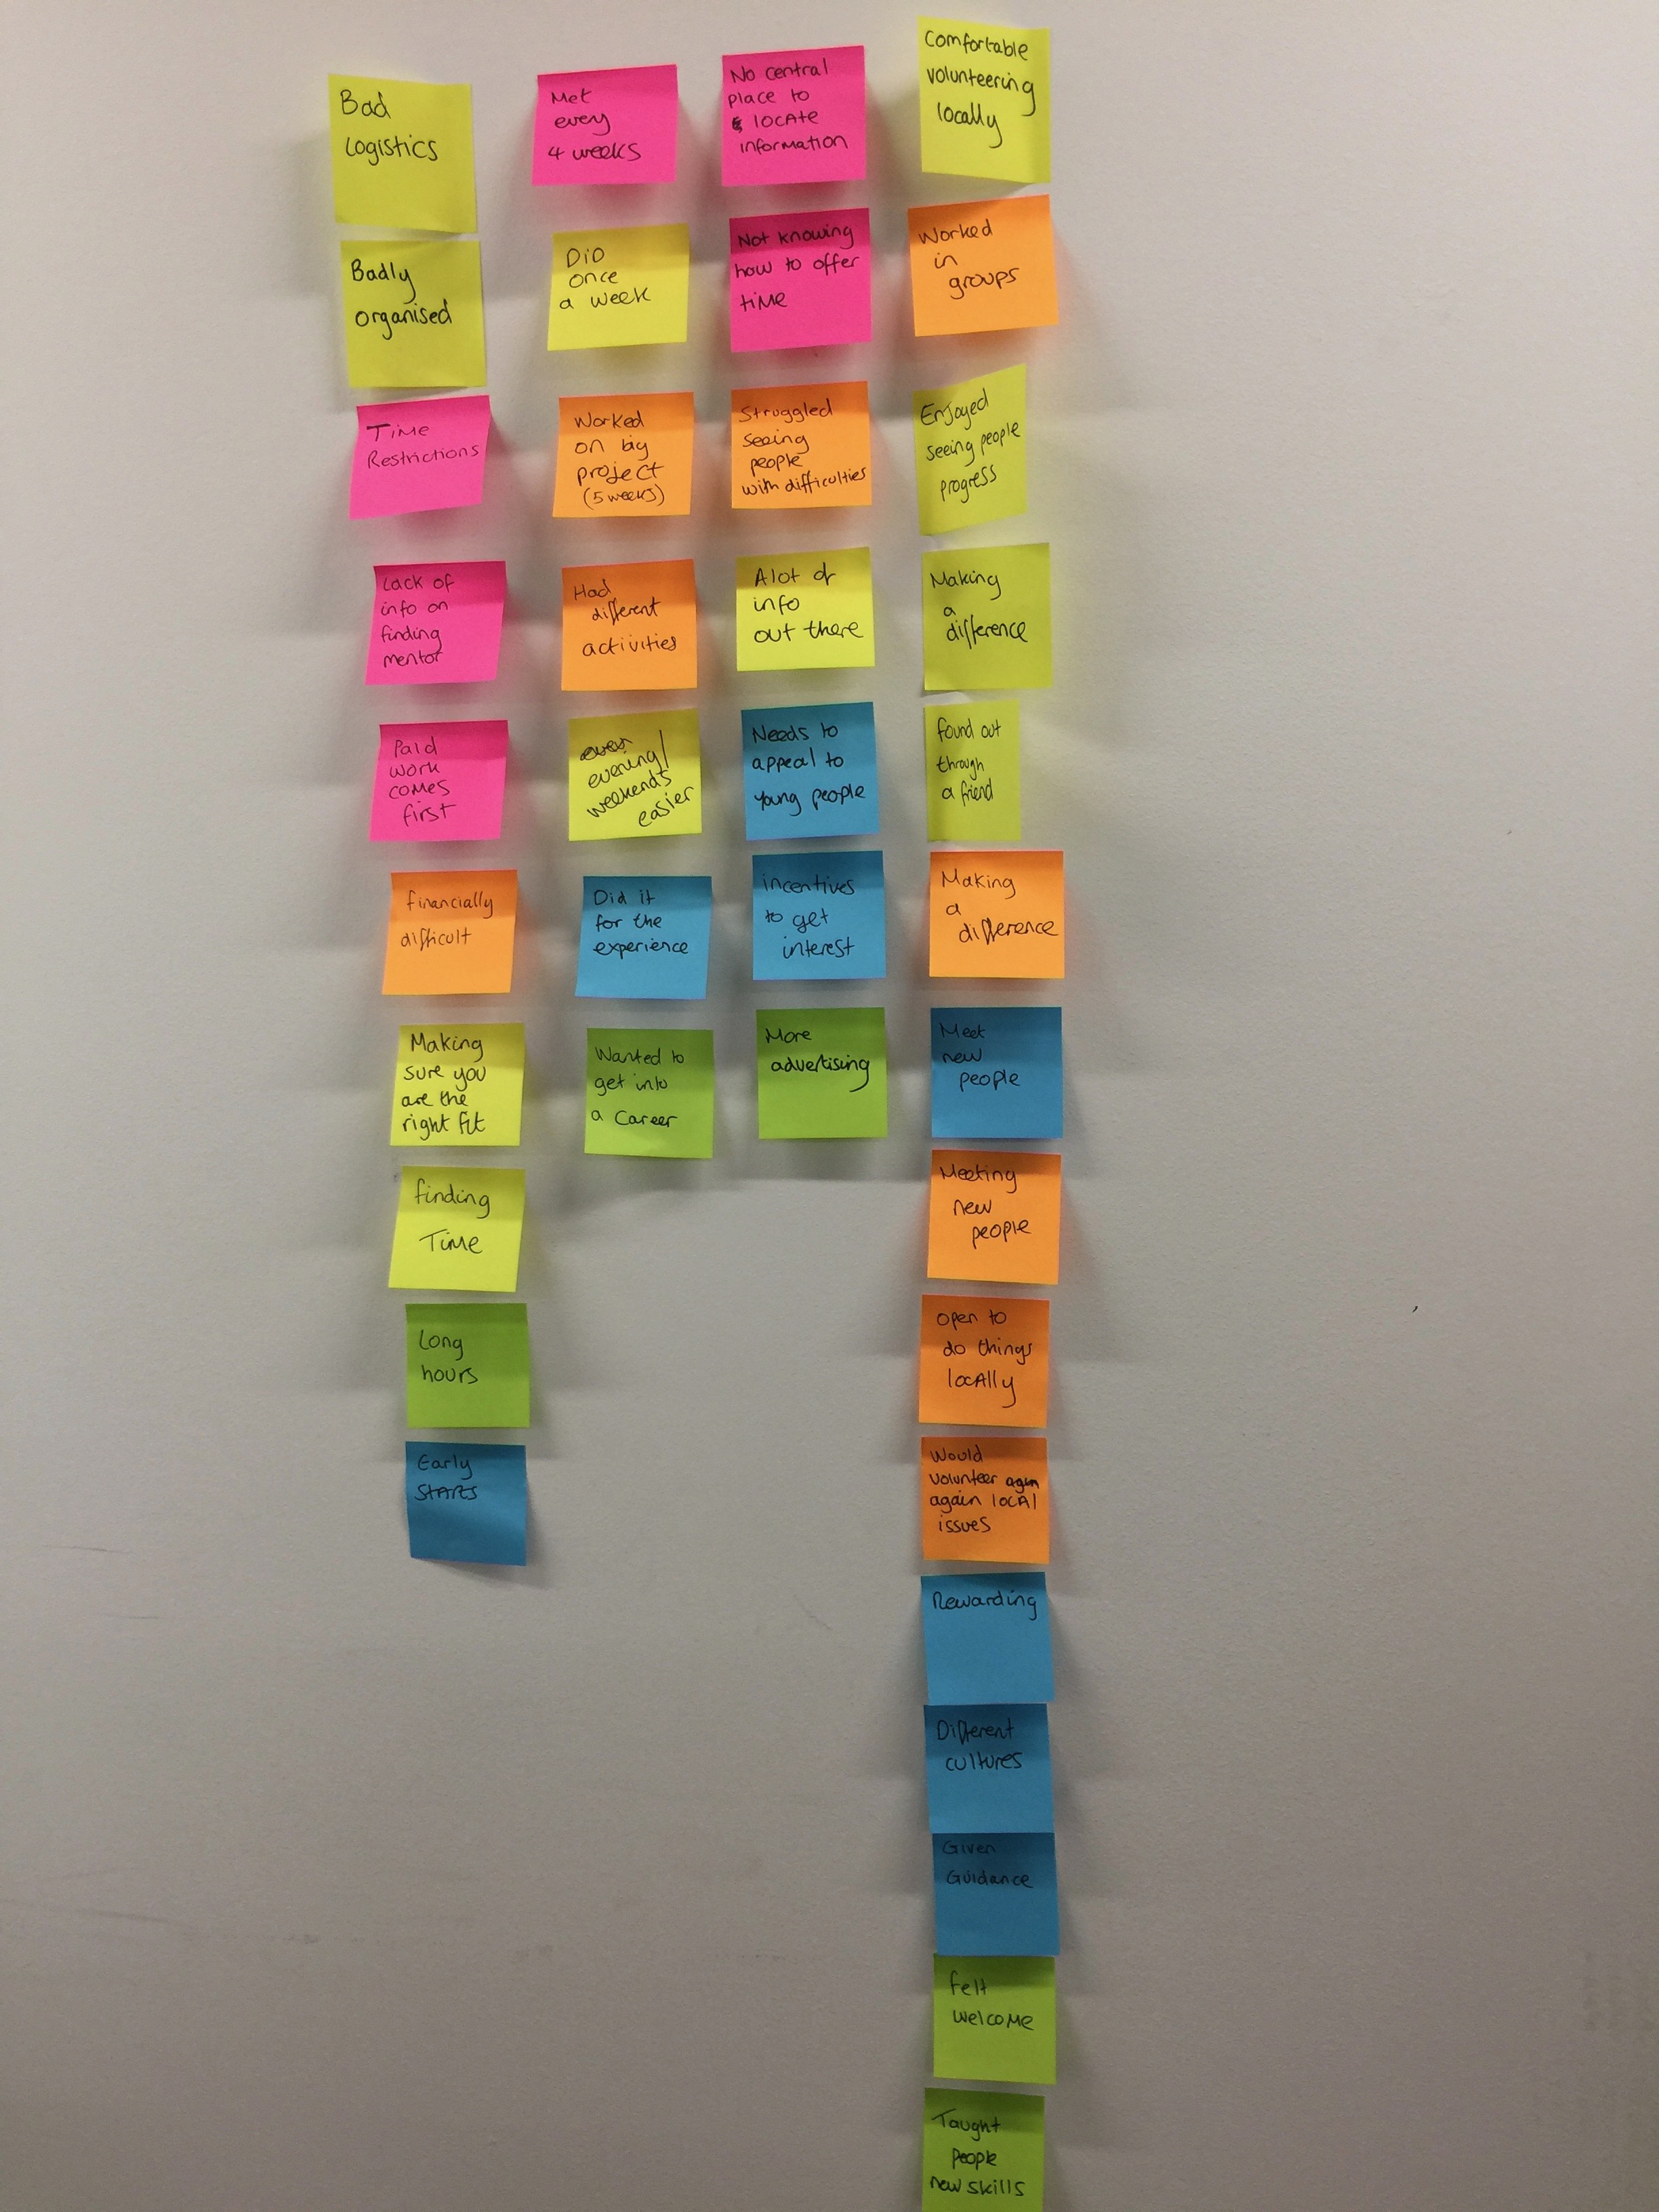 affinity-mapping